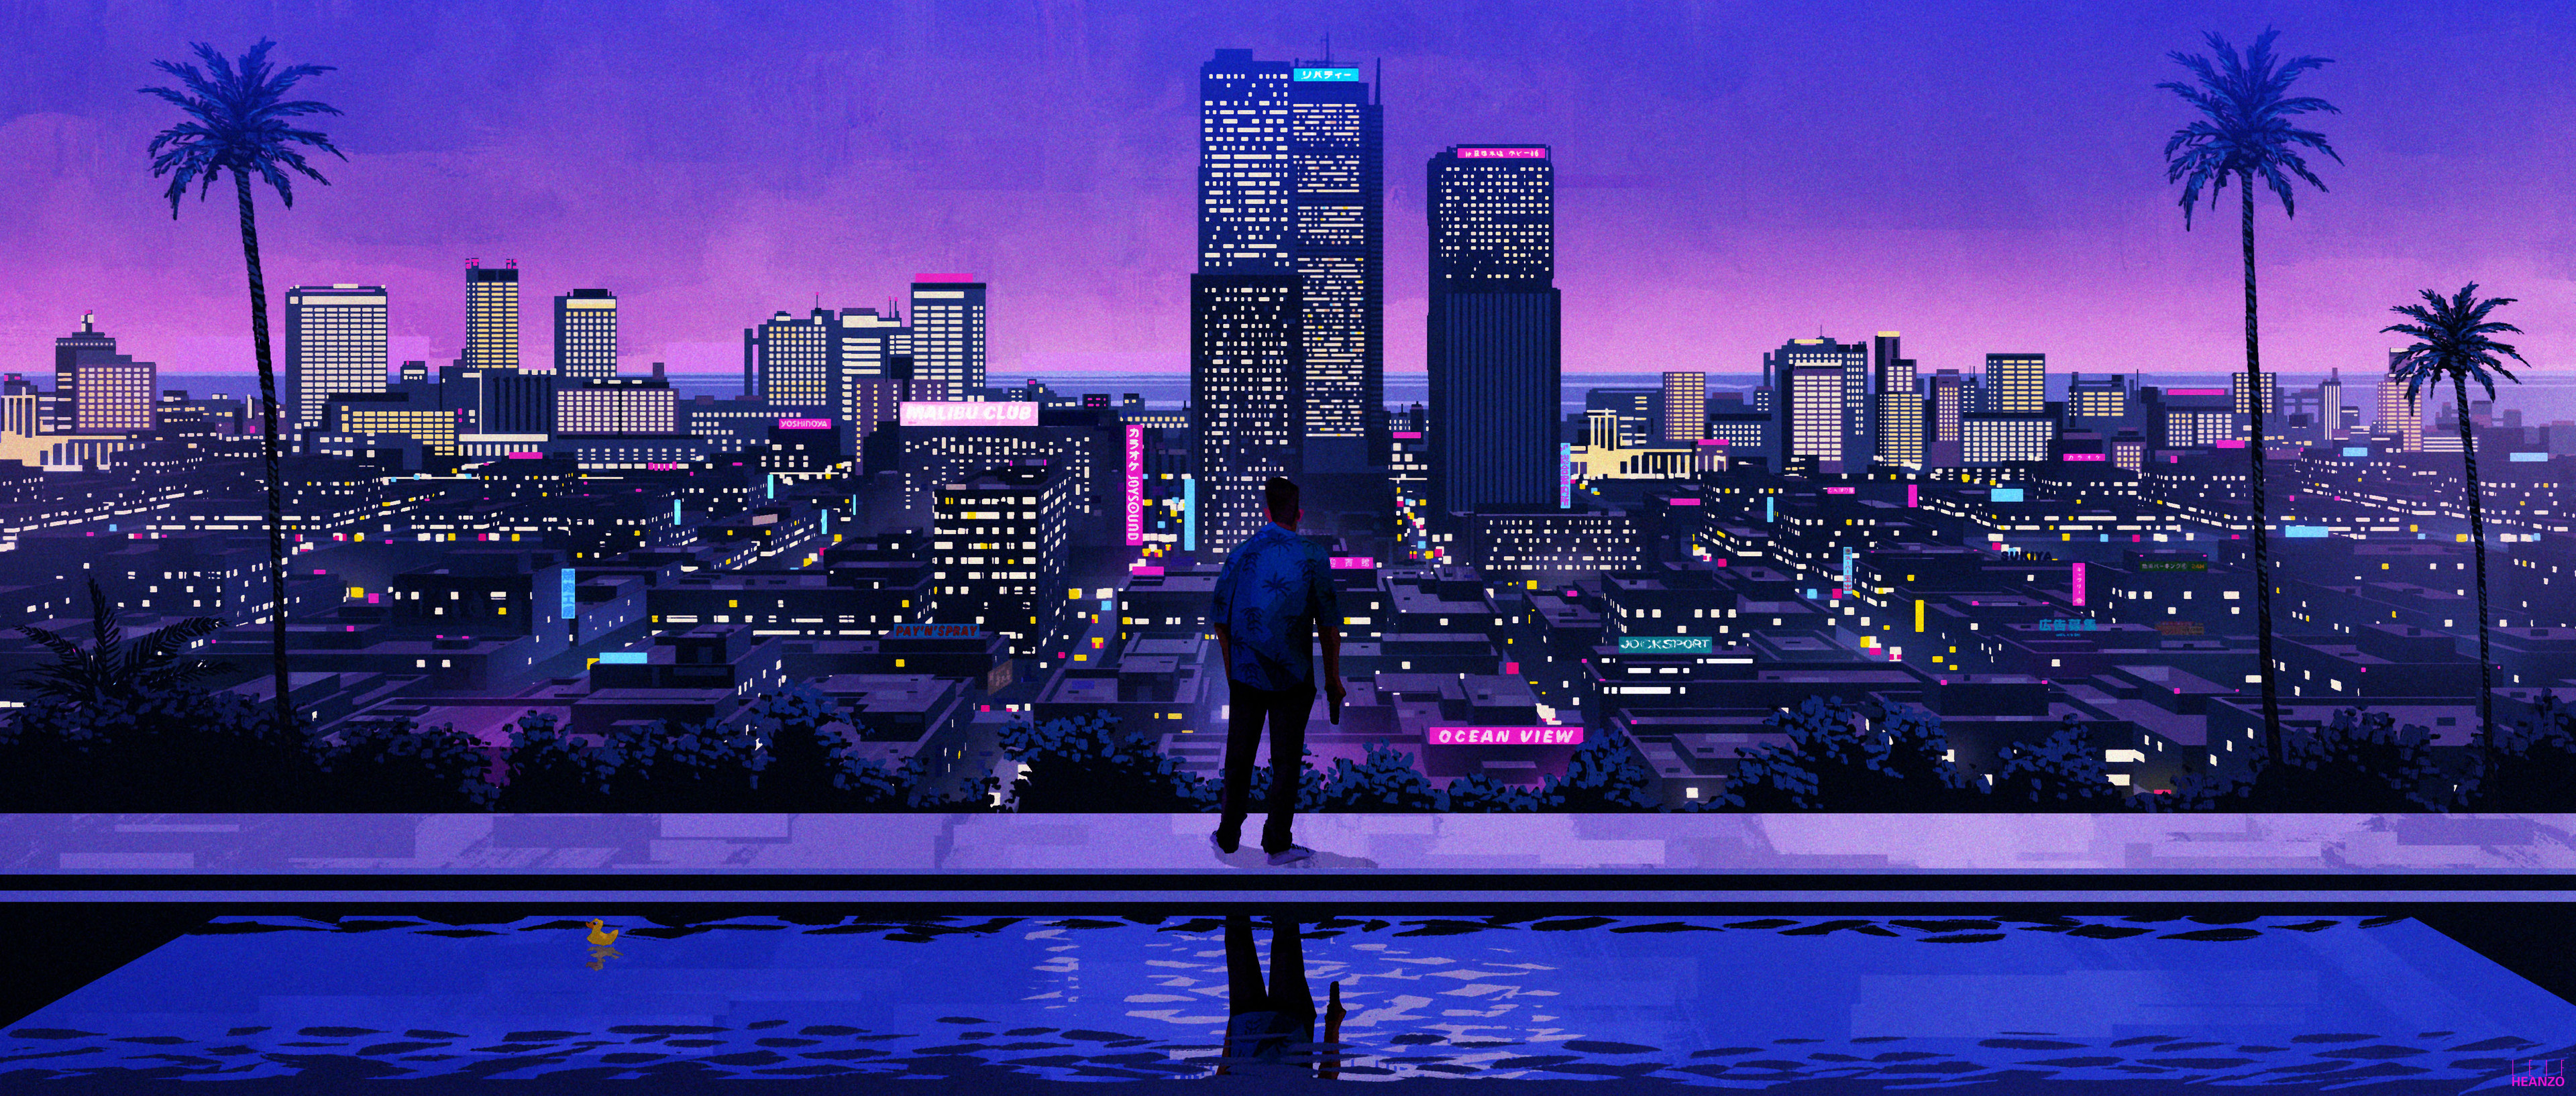 General 3840x1634 Leif Heanzo digital art artwork illustration city cityscape blue palm trees night nightscape water reflection swimming pool watermarked city lights standing looking away looking into the distance building skyscraper Vice City